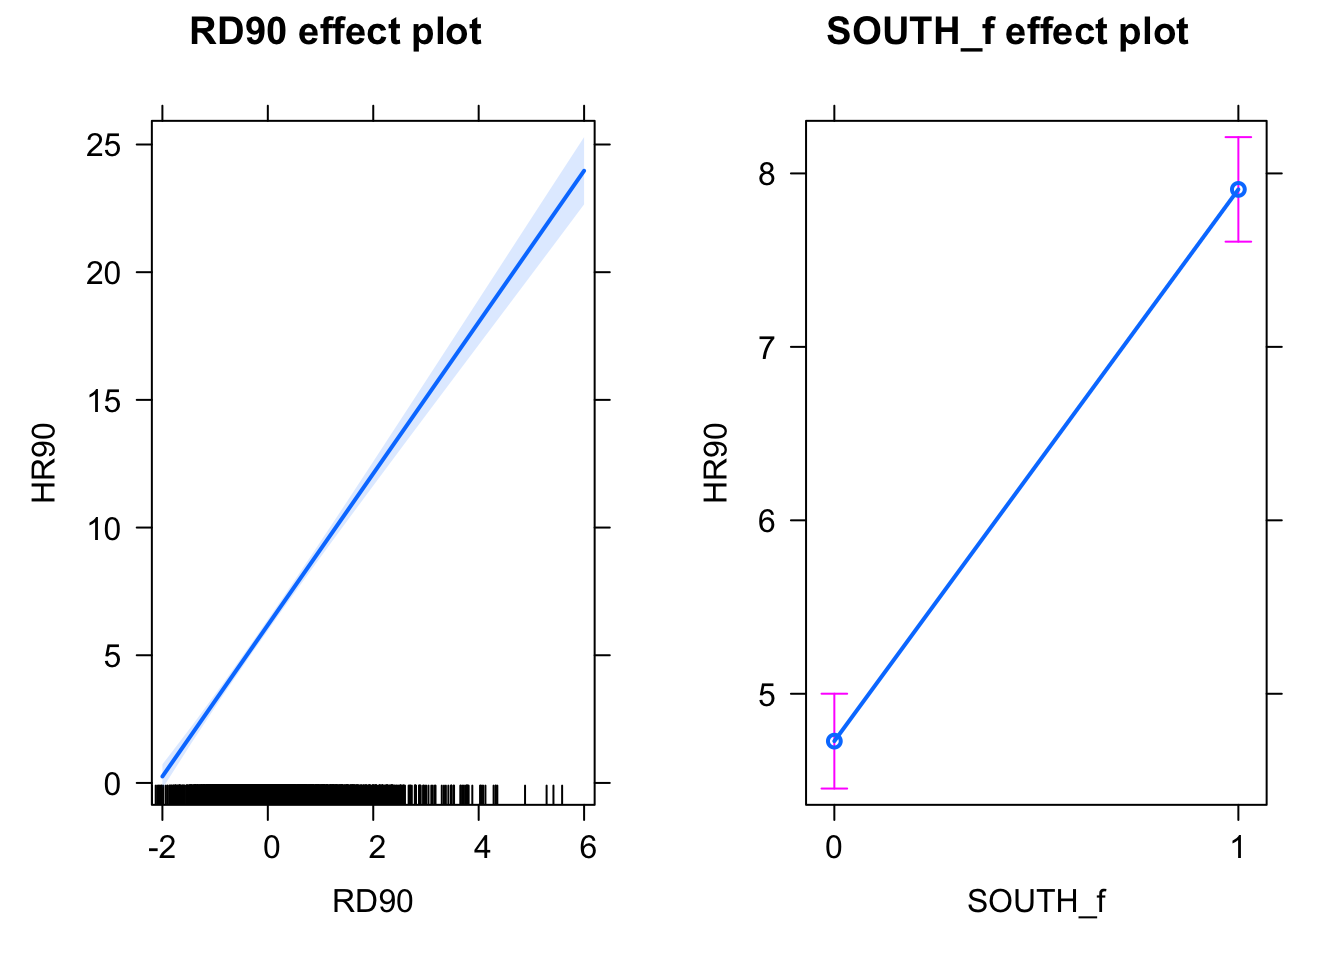 Two line plots side by side, the first titled 'RD90 effect plot', and the second 'South f effect plot'. Both have a vertical axis labeled 'HR90', though their values differ. The left plot has horizontal axis 'RD90' from negative two to six, while the right is 'South f' from zero to one. The lines are of similar slope, but not identical. The line in the left plot has a shaded light blue area around it, which grows as you move away from zero. The line on the right ends in small circles at zero and one, which both lie on pink error bars.